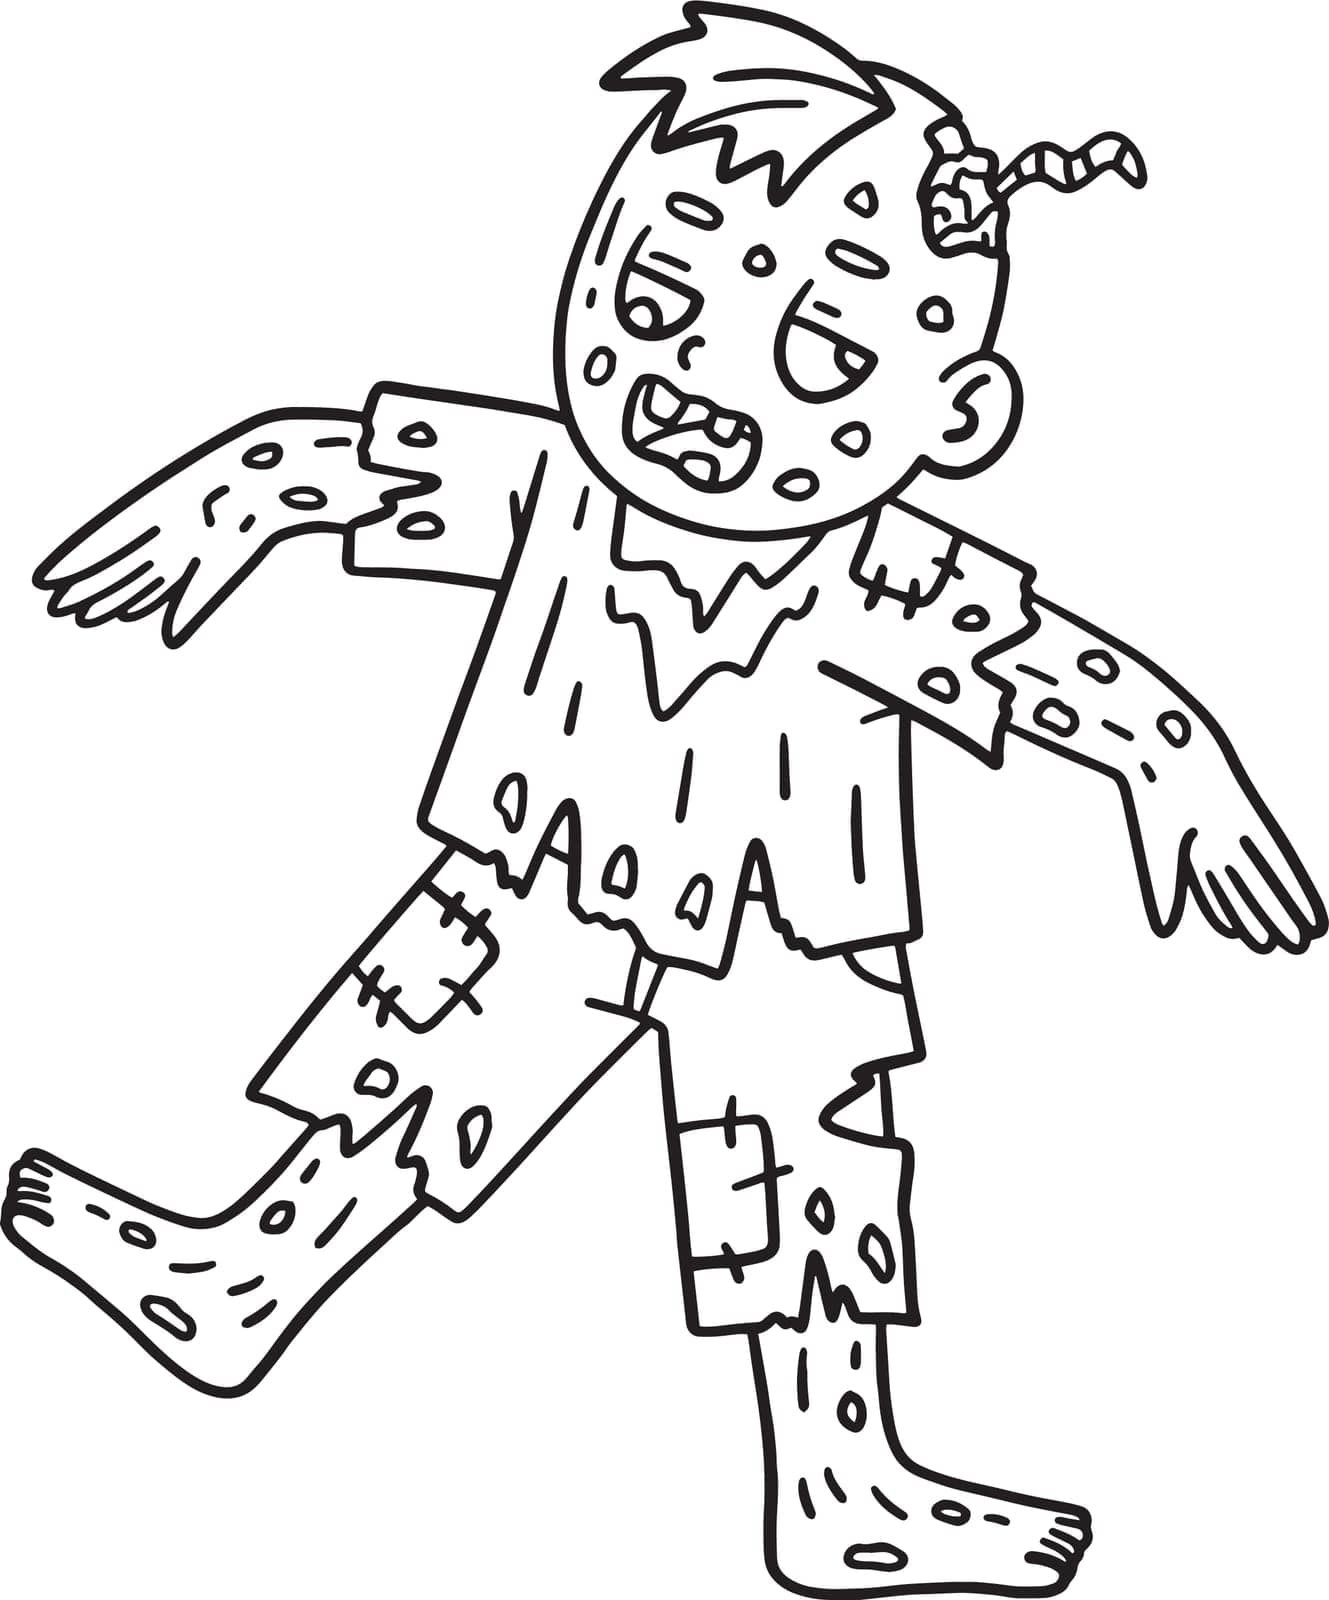 Walking Zombie Isolated Coloring Page for Kids by abbydesign